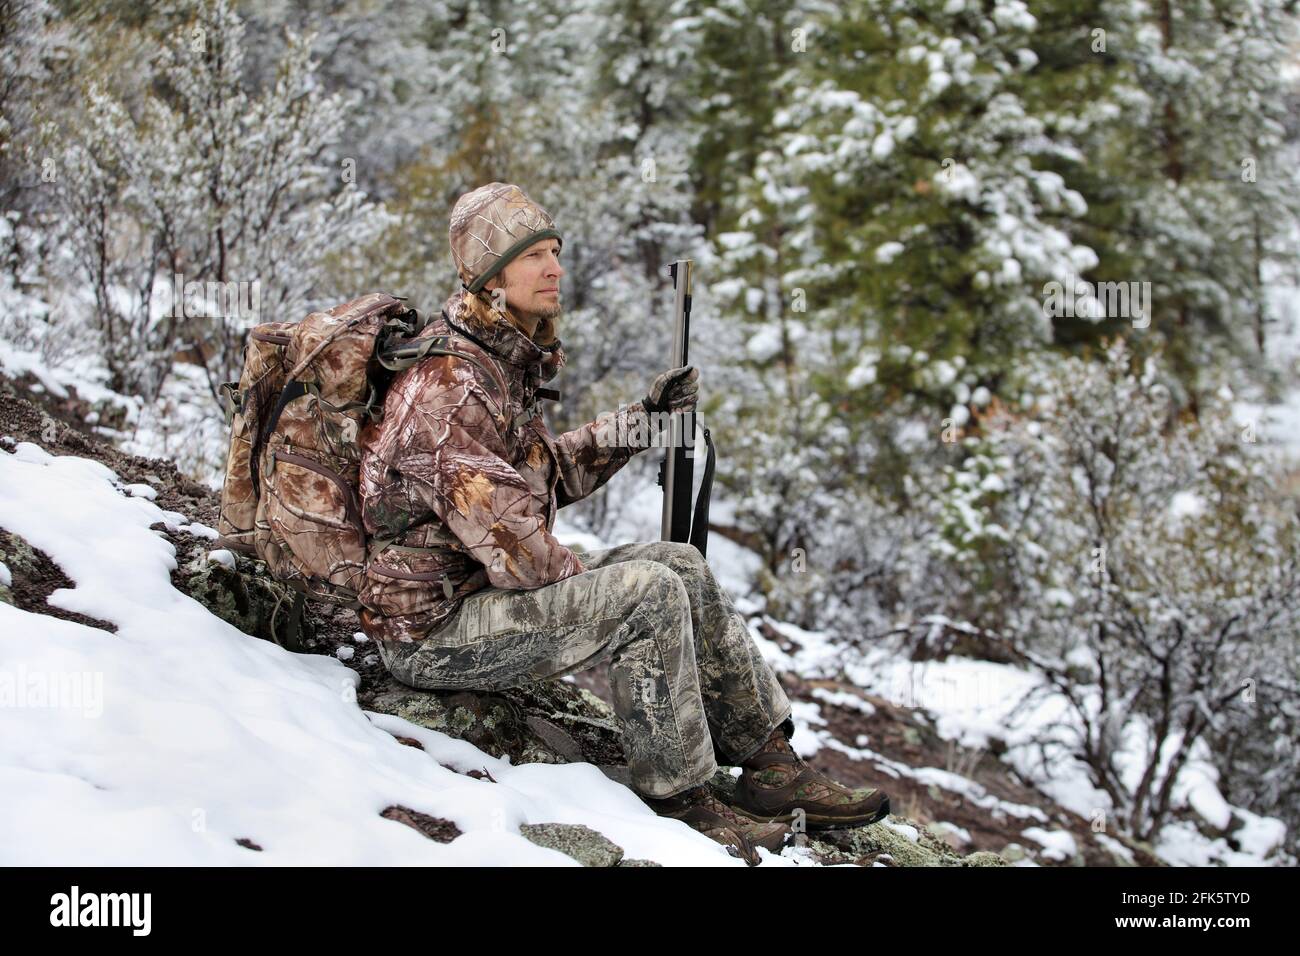 gun hunter wearing camouflage and sitting in snowy scene holding rifle Stock Photo